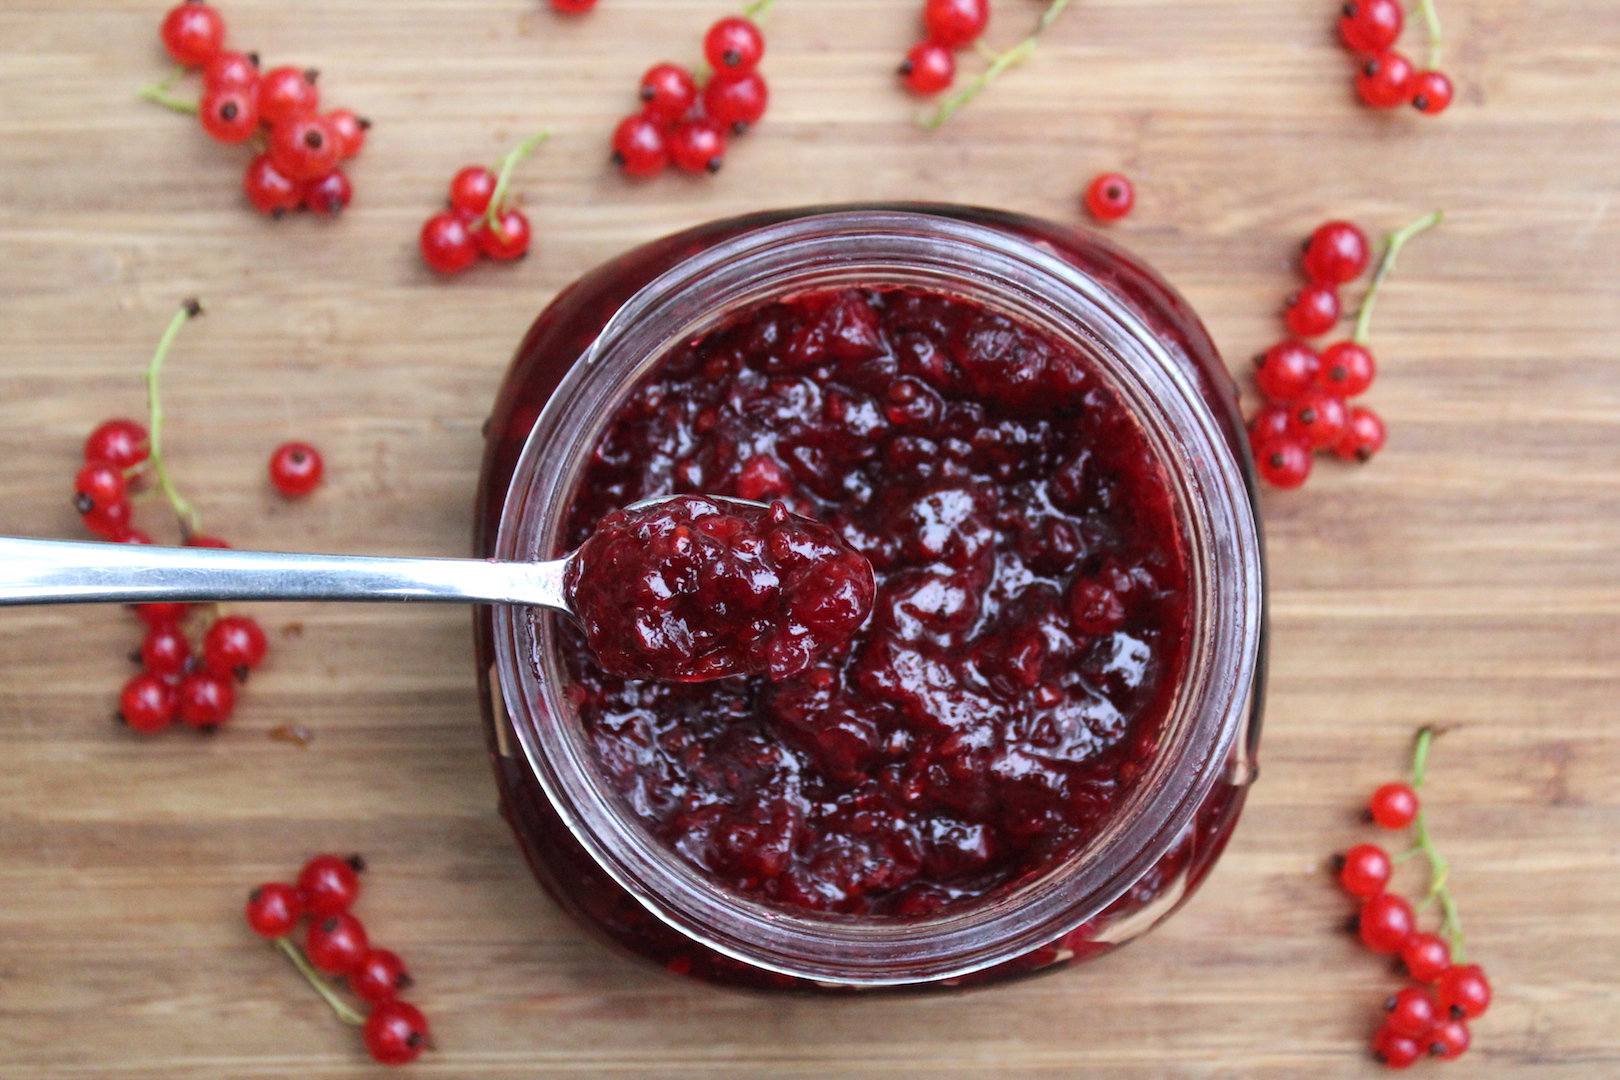 Homemade Red Currant Jam